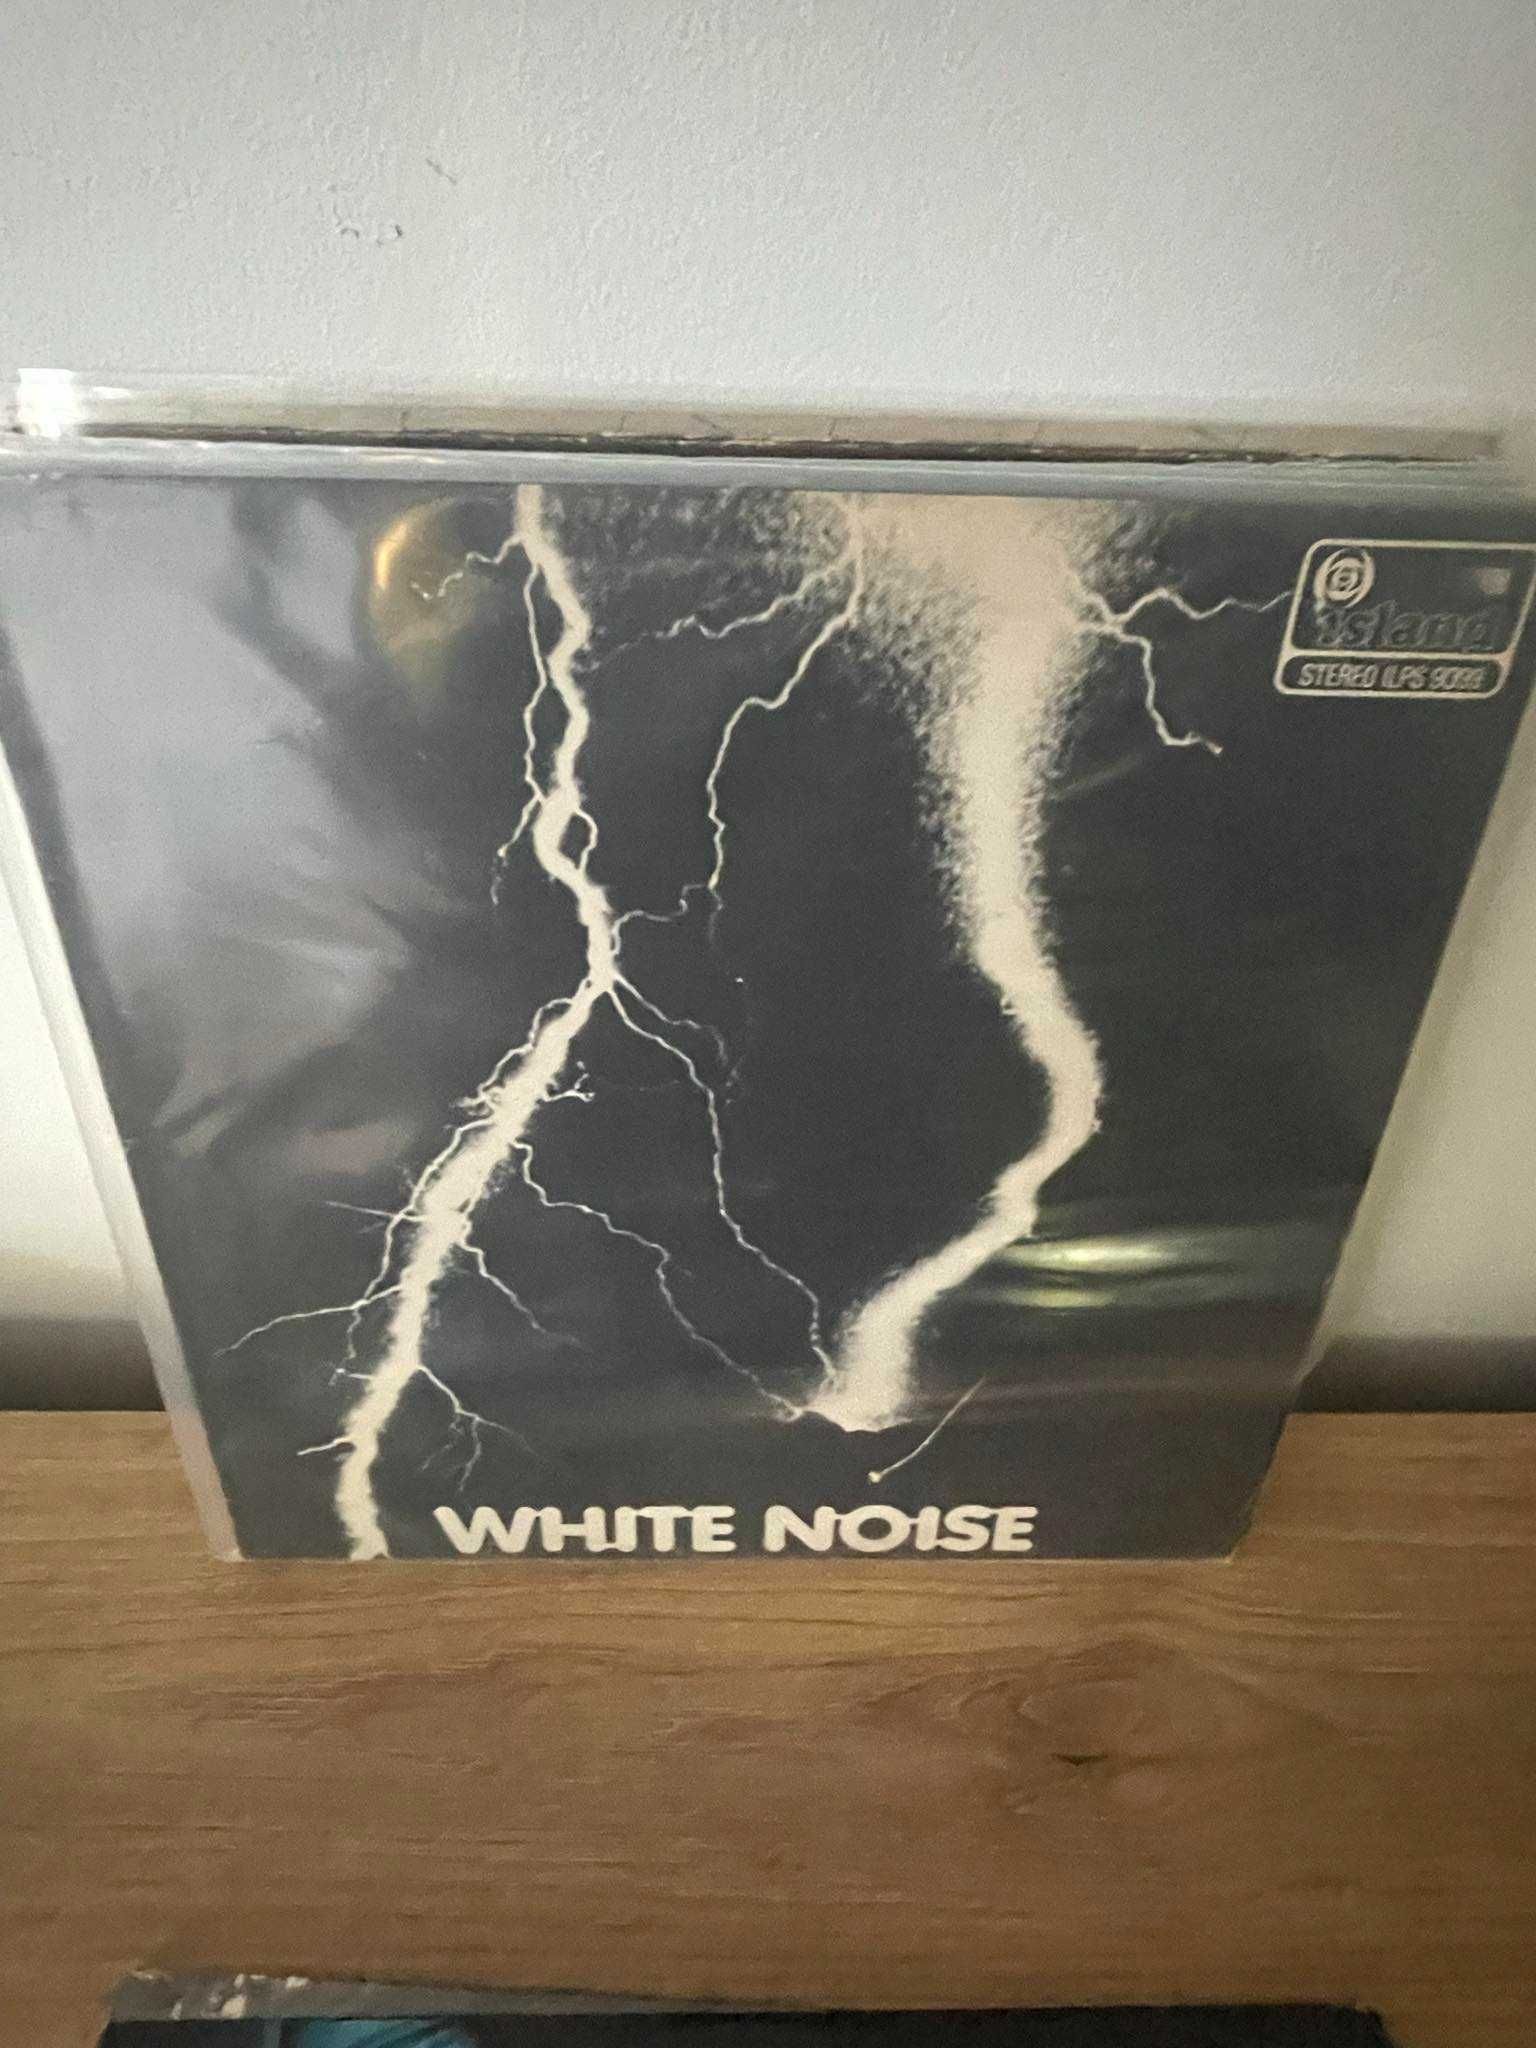 White Noise – An Electric Storm